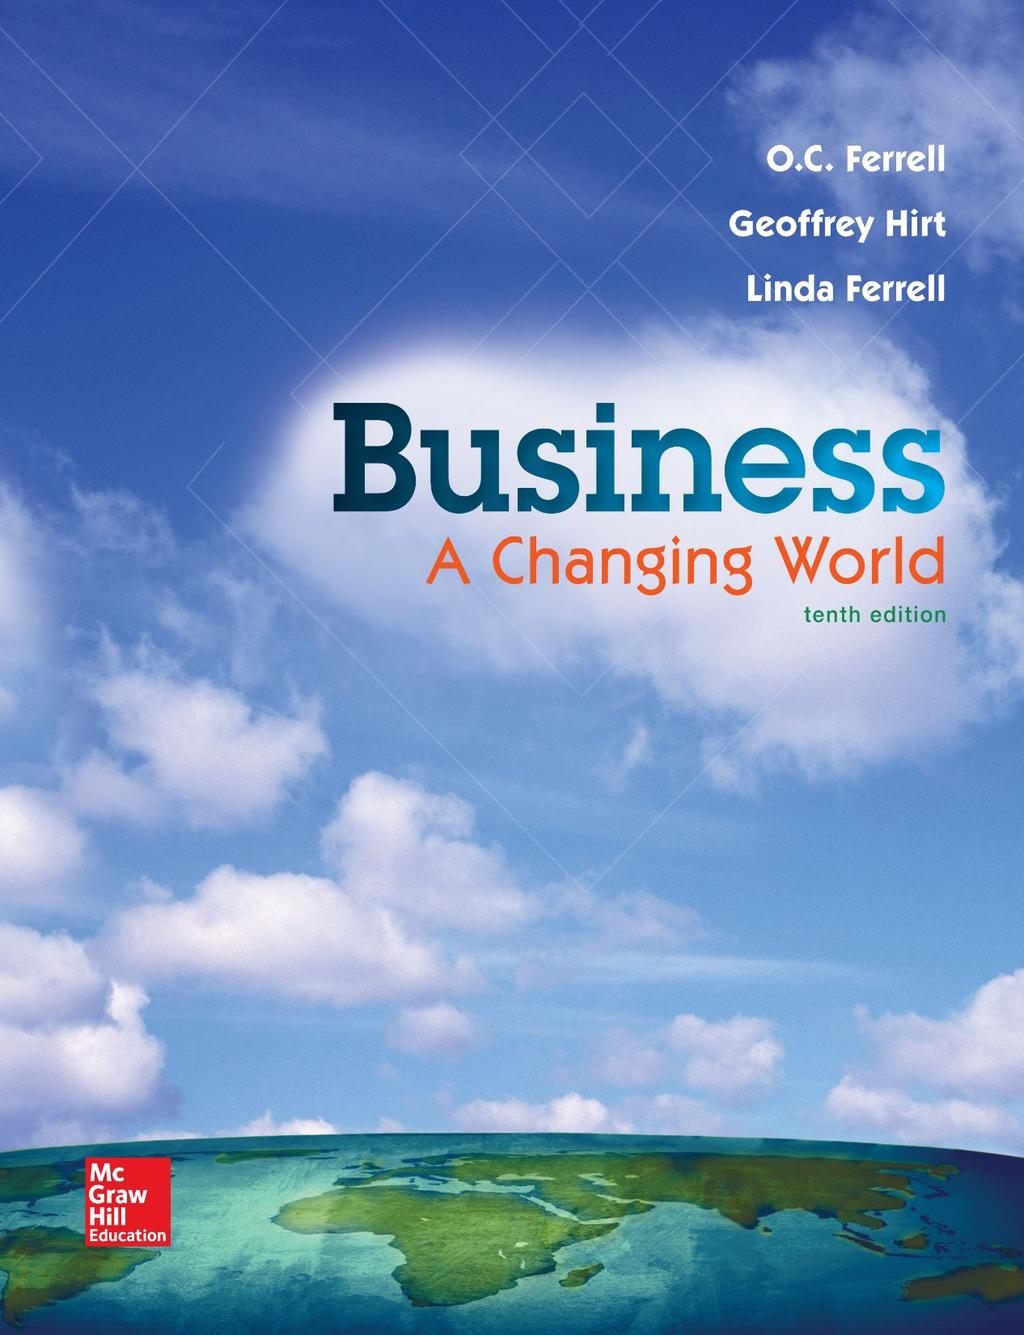 Part 1 Business in a Changing World 2016 by McGraw-Hill Education. This is proprietary material solely for authorized instructor use.